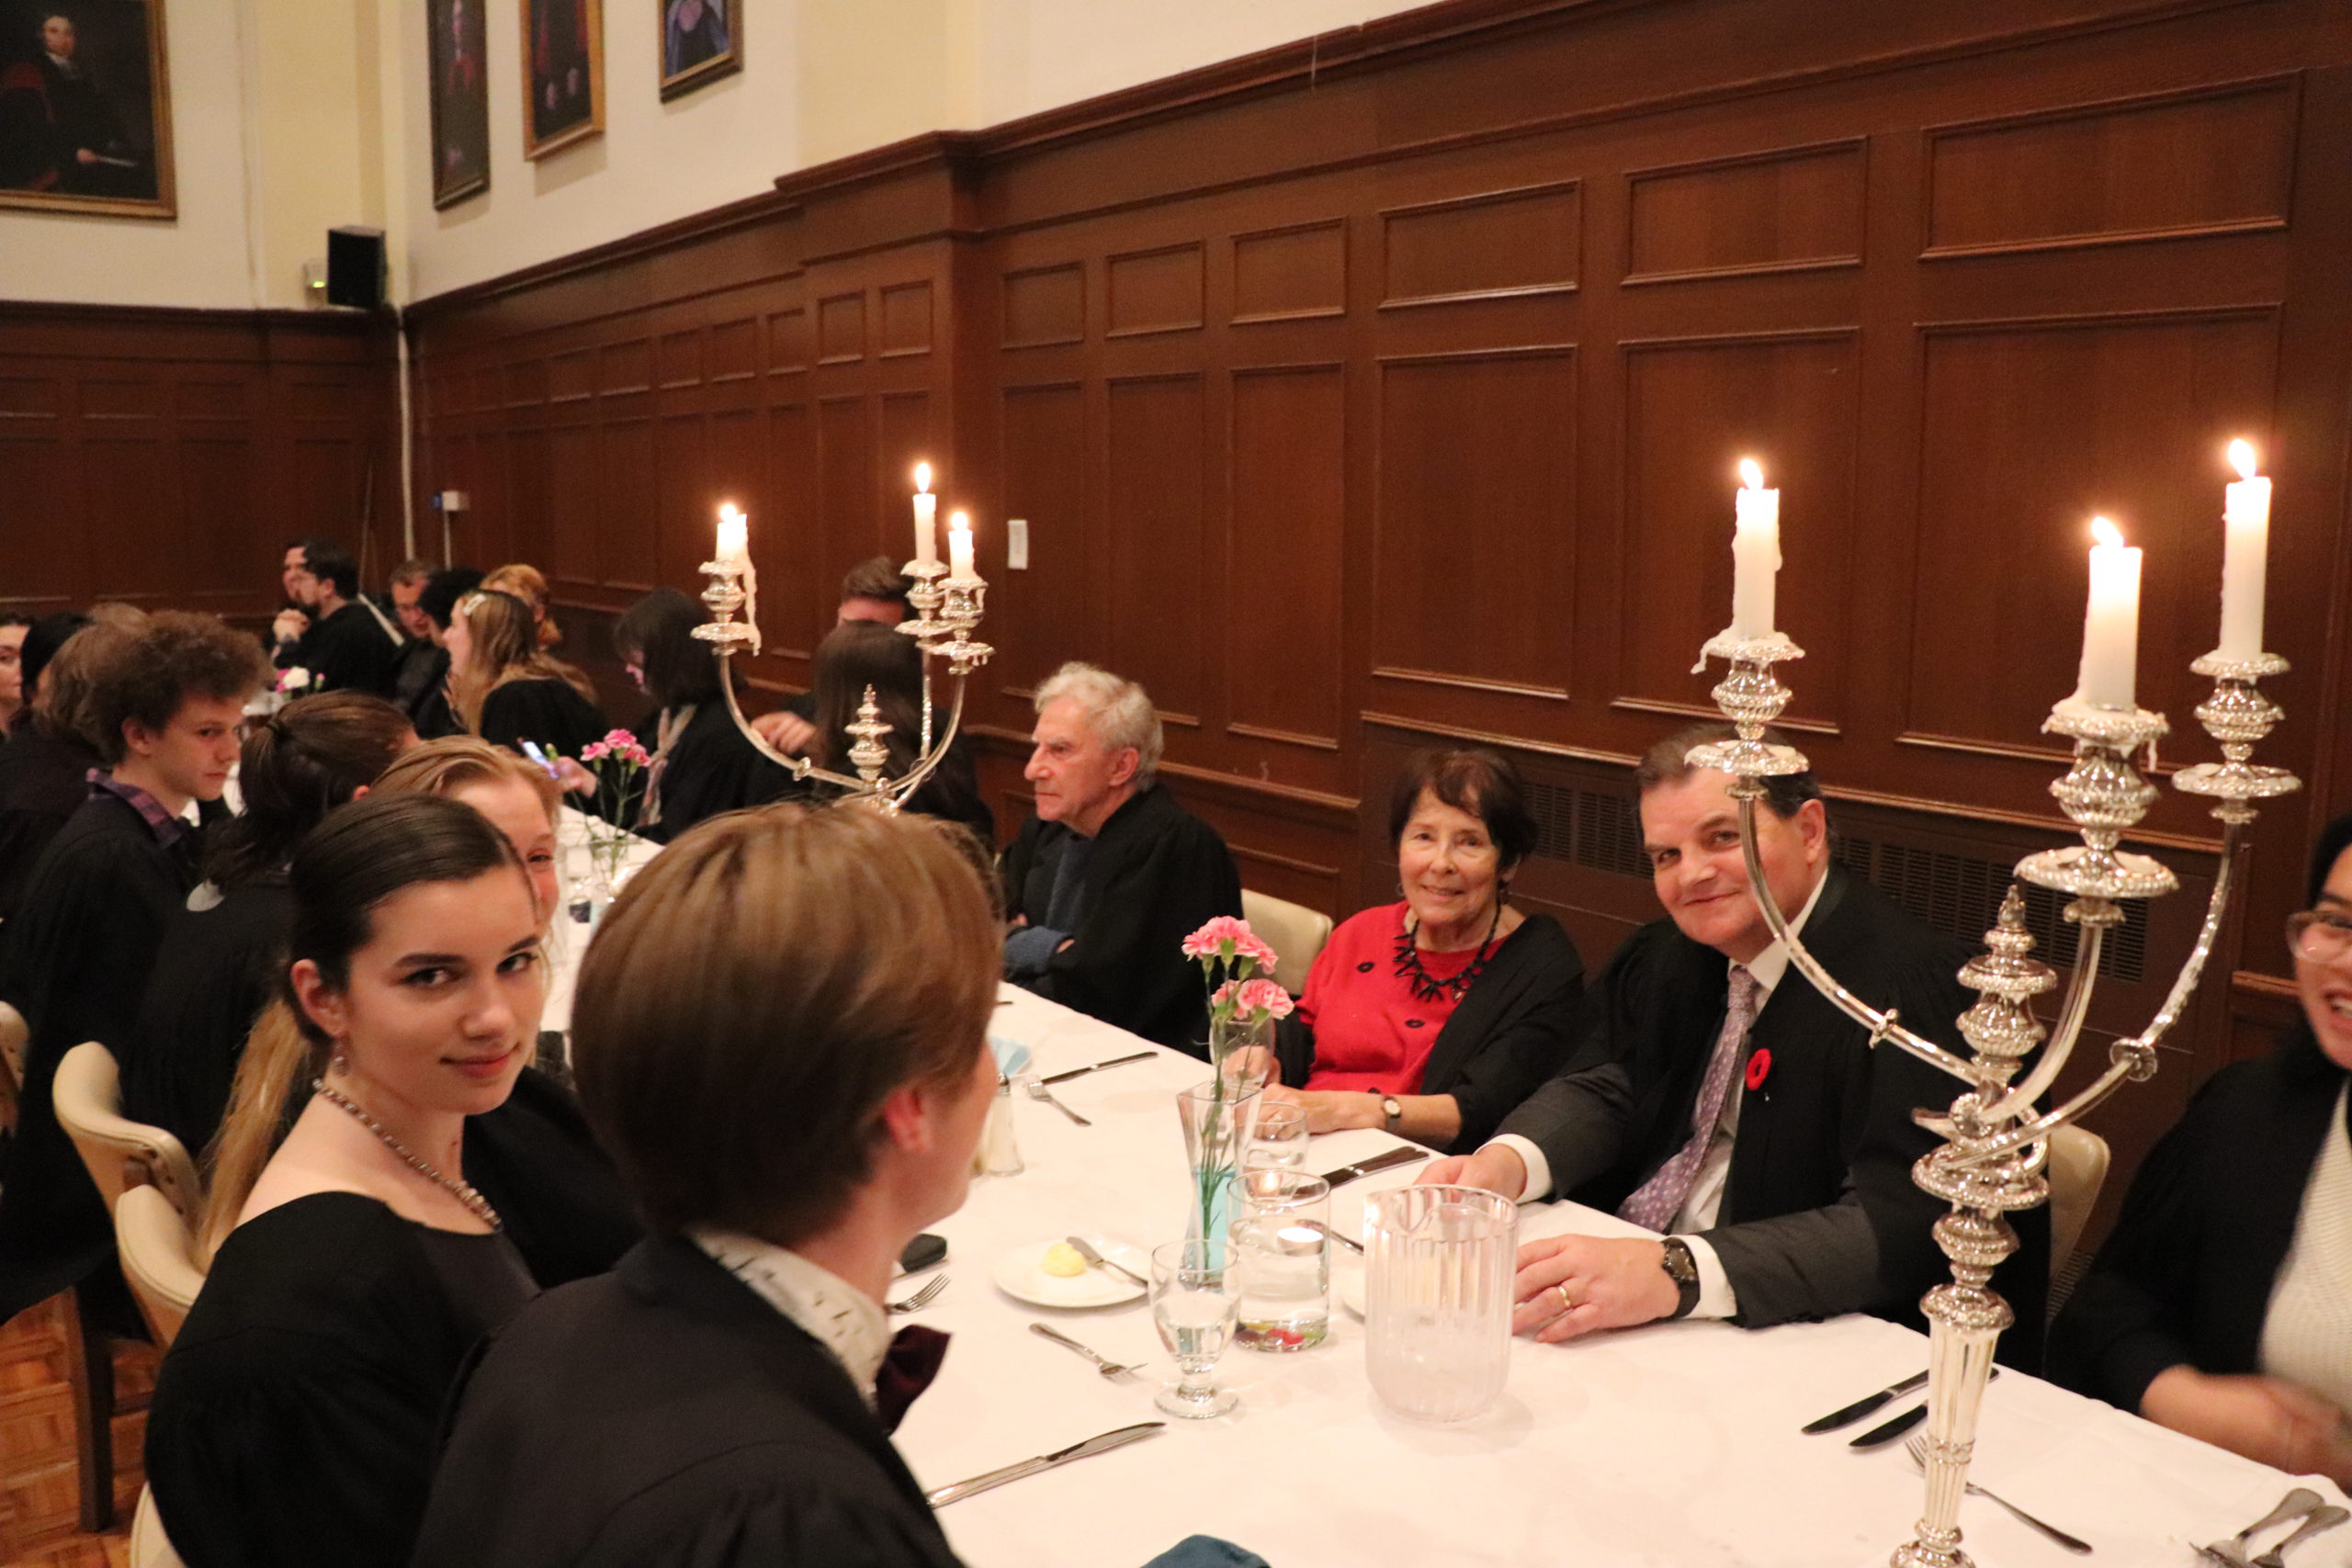 Students attend a Formal Meal at Prince Hall